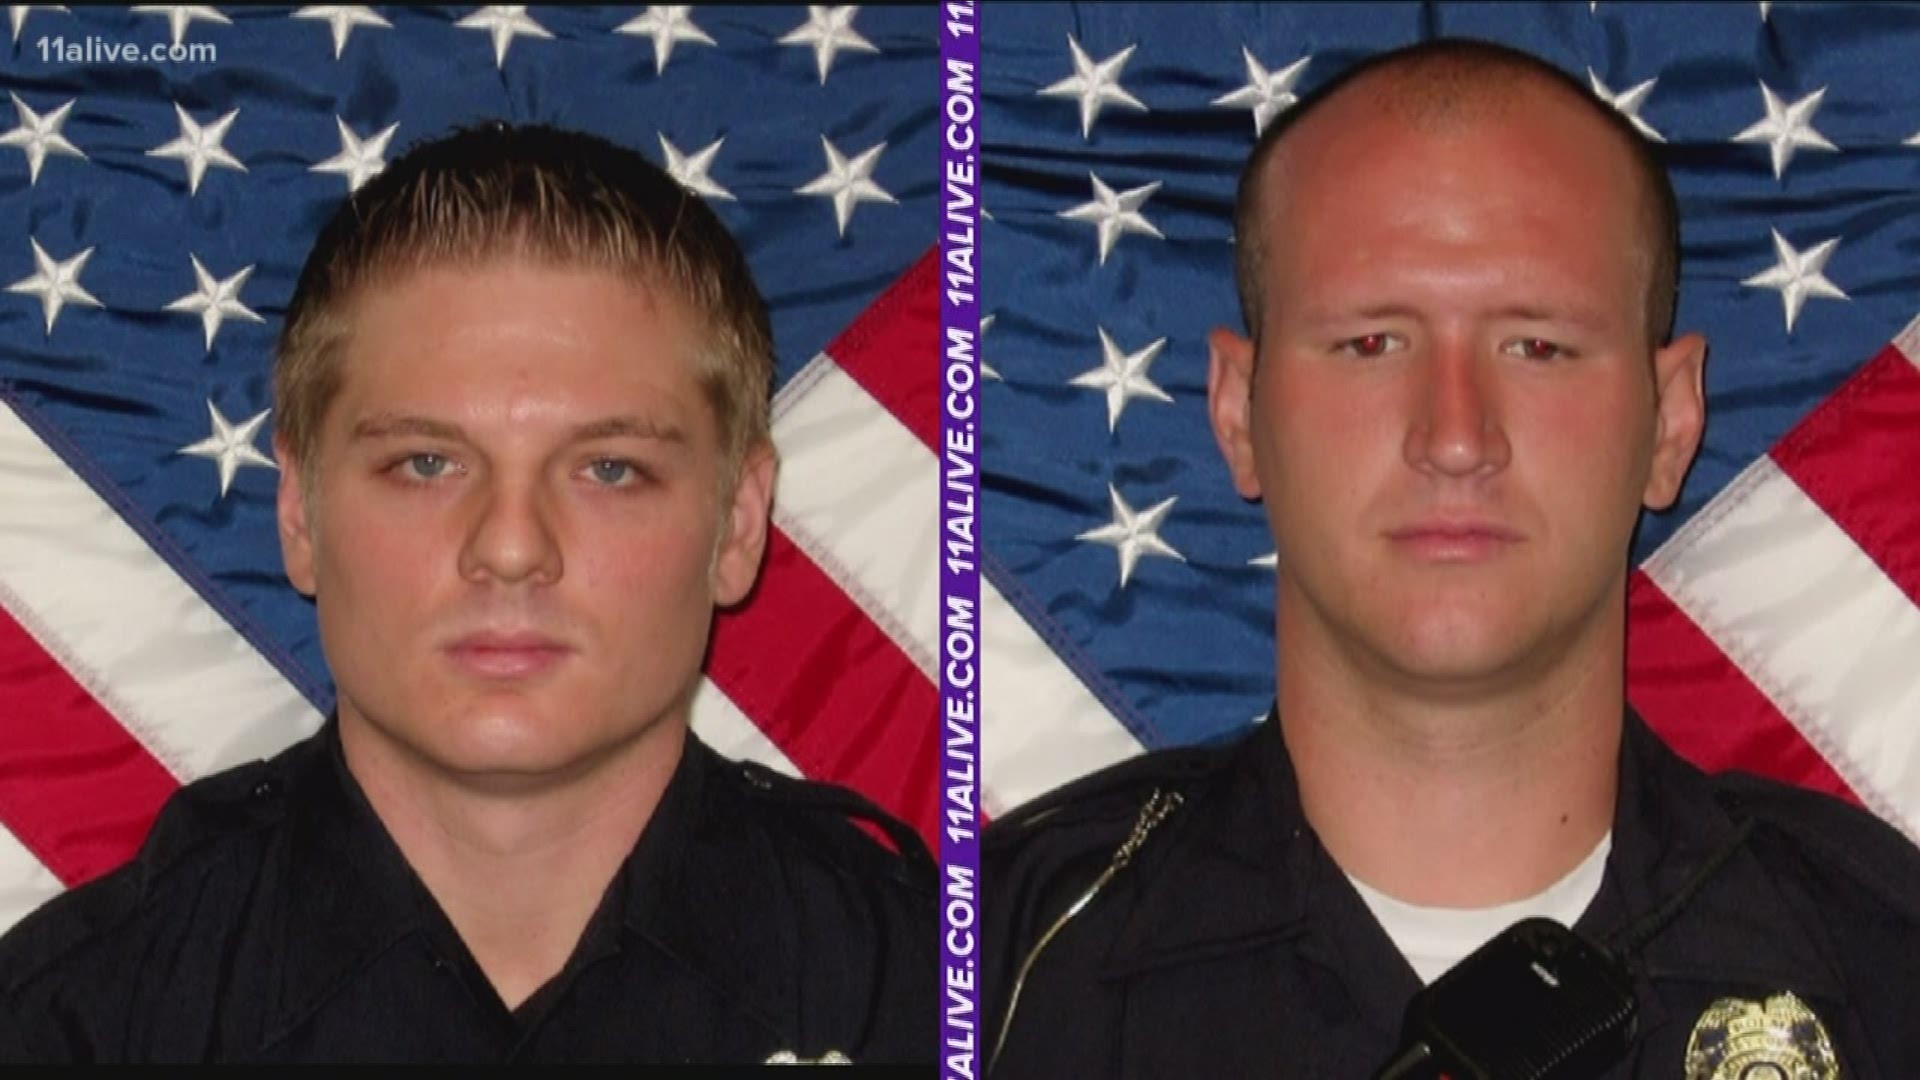 Just over a day after two officers narrowly escaped with their lives while performing a welfare check, both men are home recovering from their injuries.